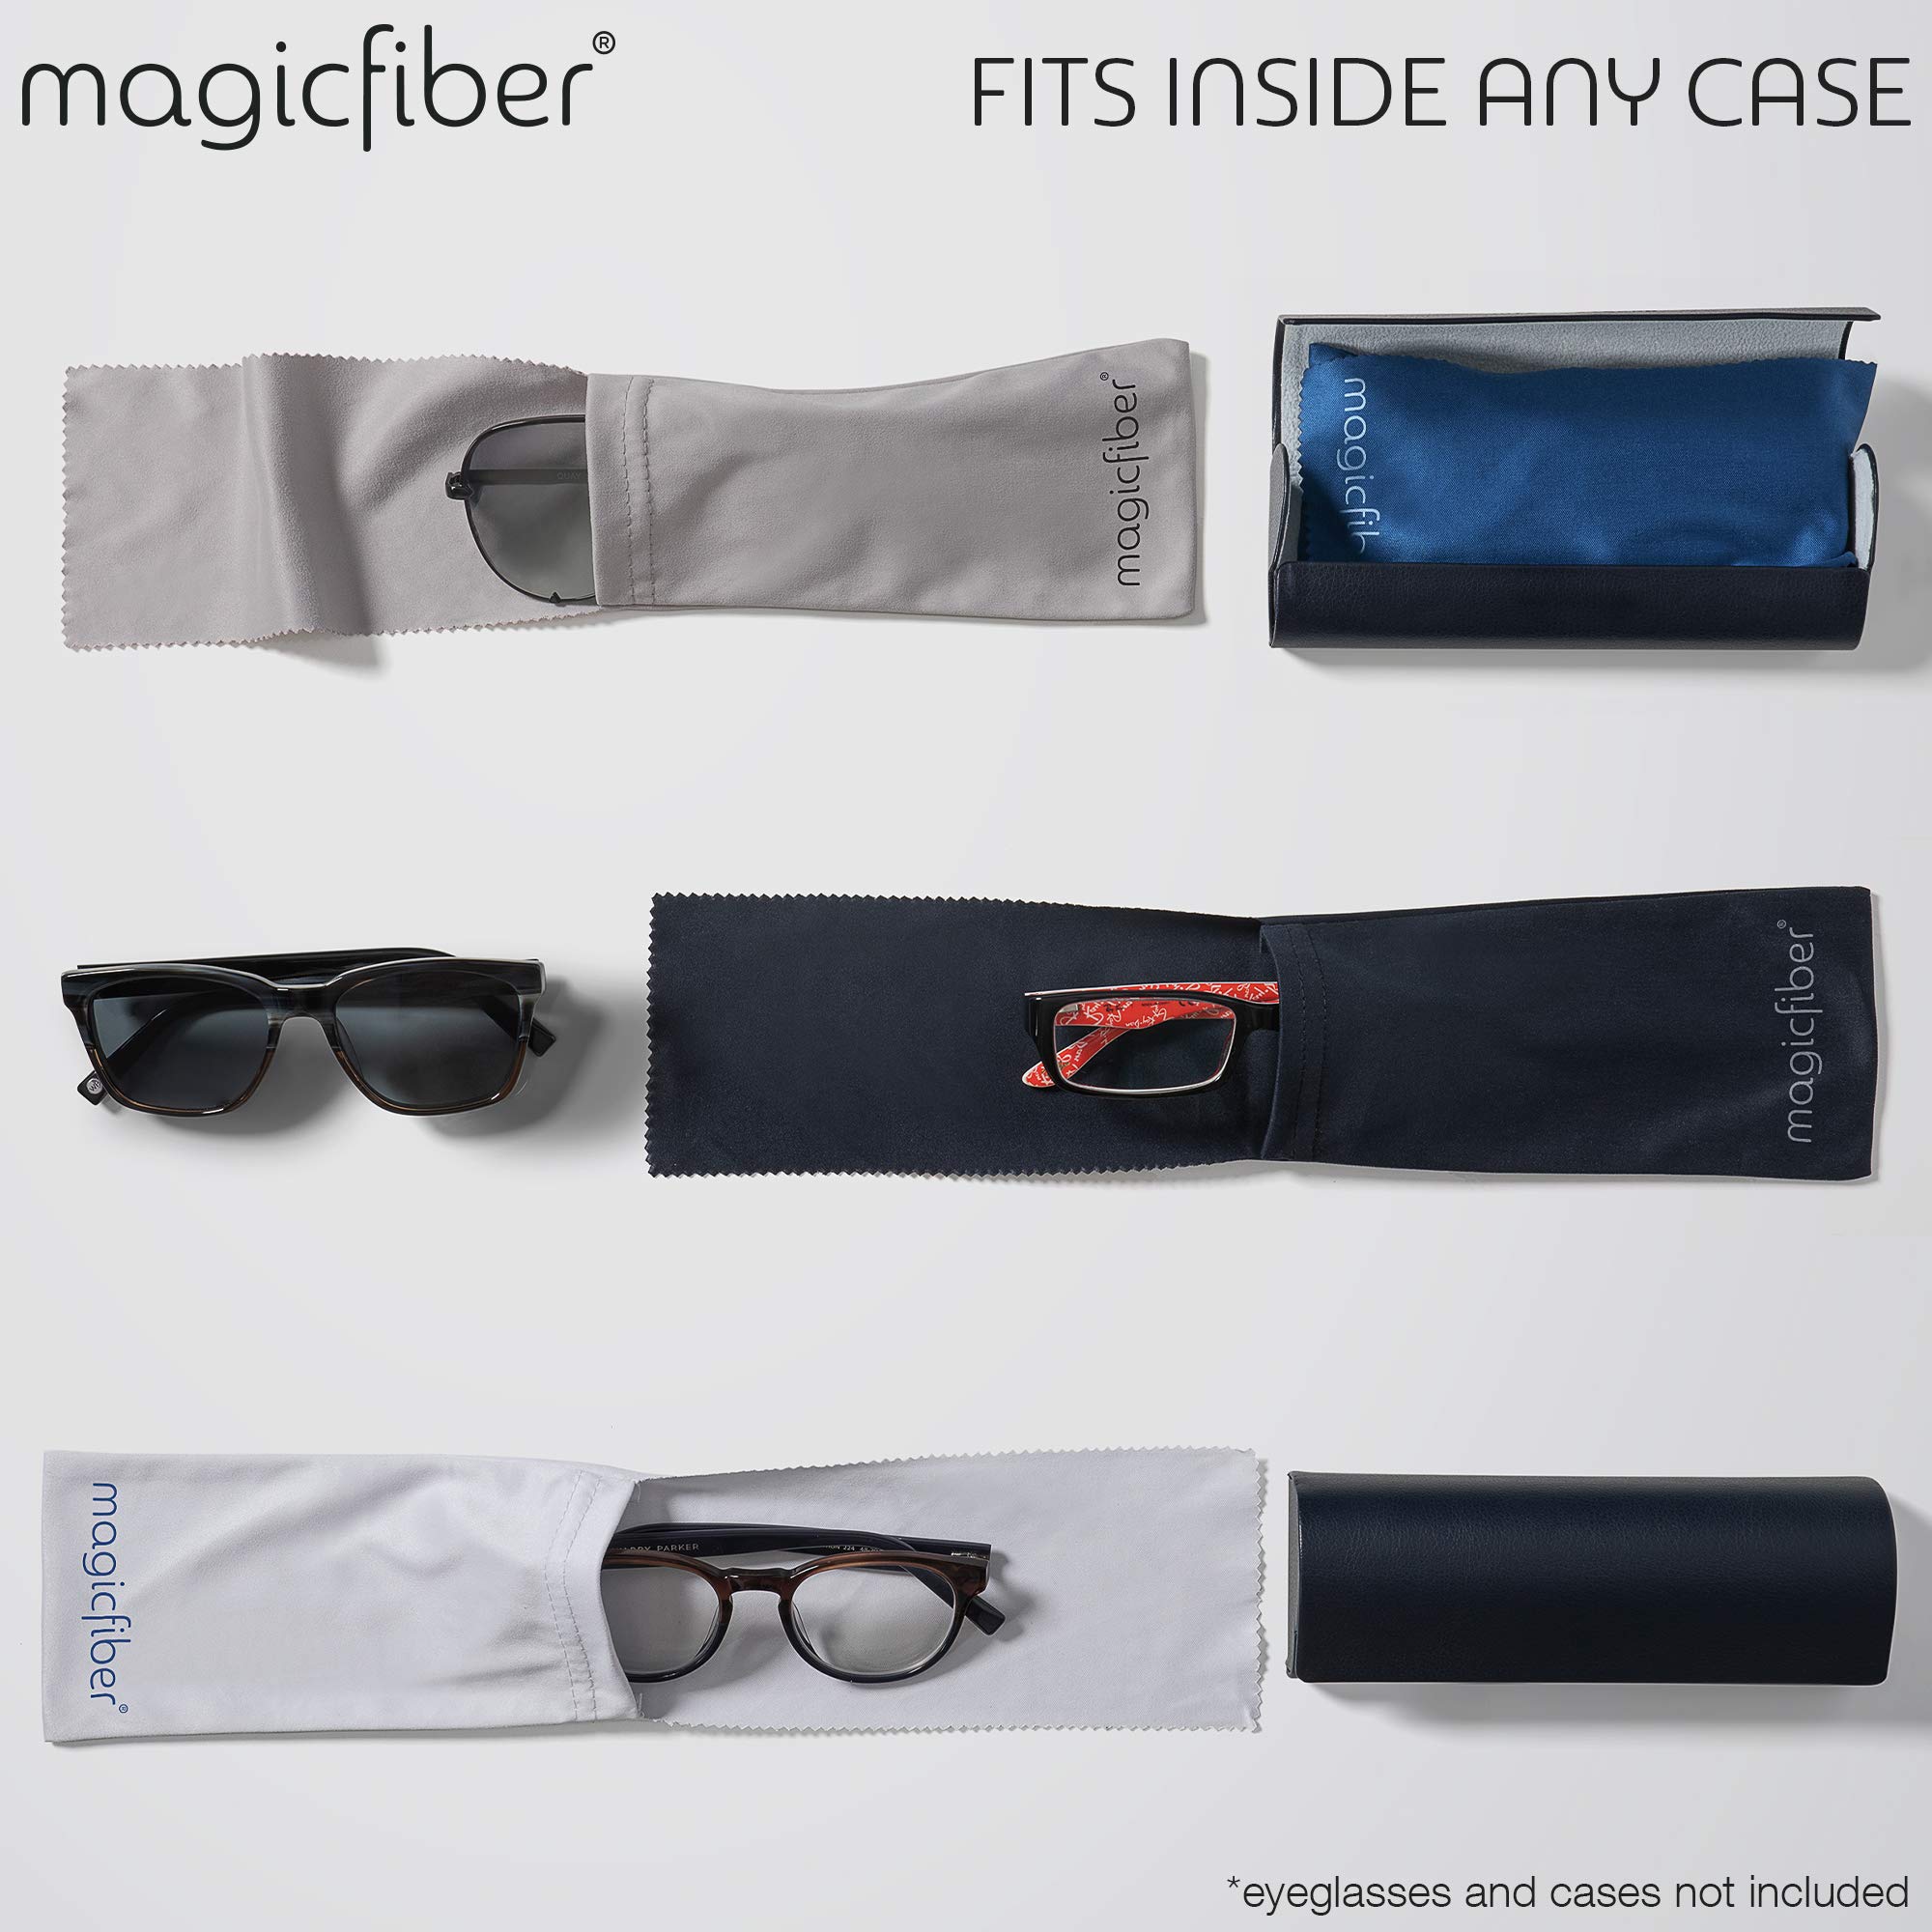 MagicFiber Glasses Case Soft (4-pack) - Sunglasses Pouch - Soft Glasses Pouch - Works as Glasses & Eyeglass Cleaner - Ultra Soft Storage with Cleaning Cloth Closure Flap - Microfiber Cloth for Glasses